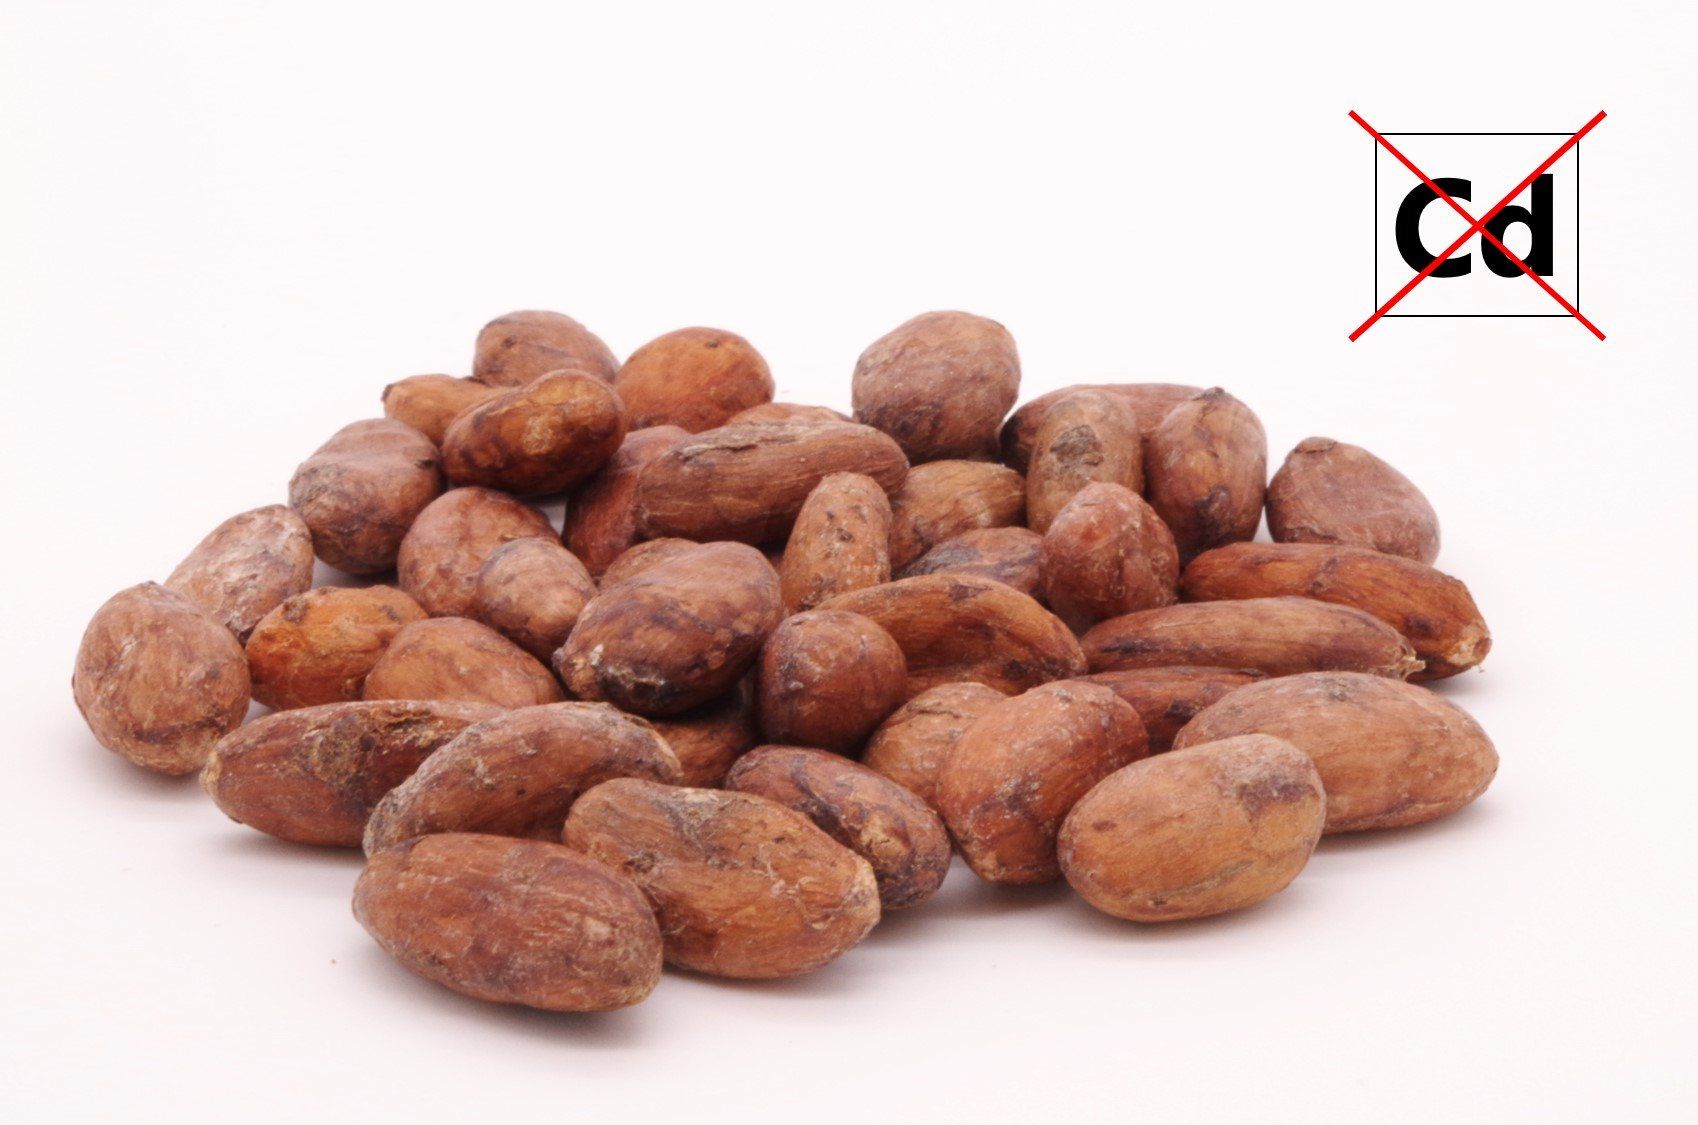 Reduction of cadmium in cacao beans